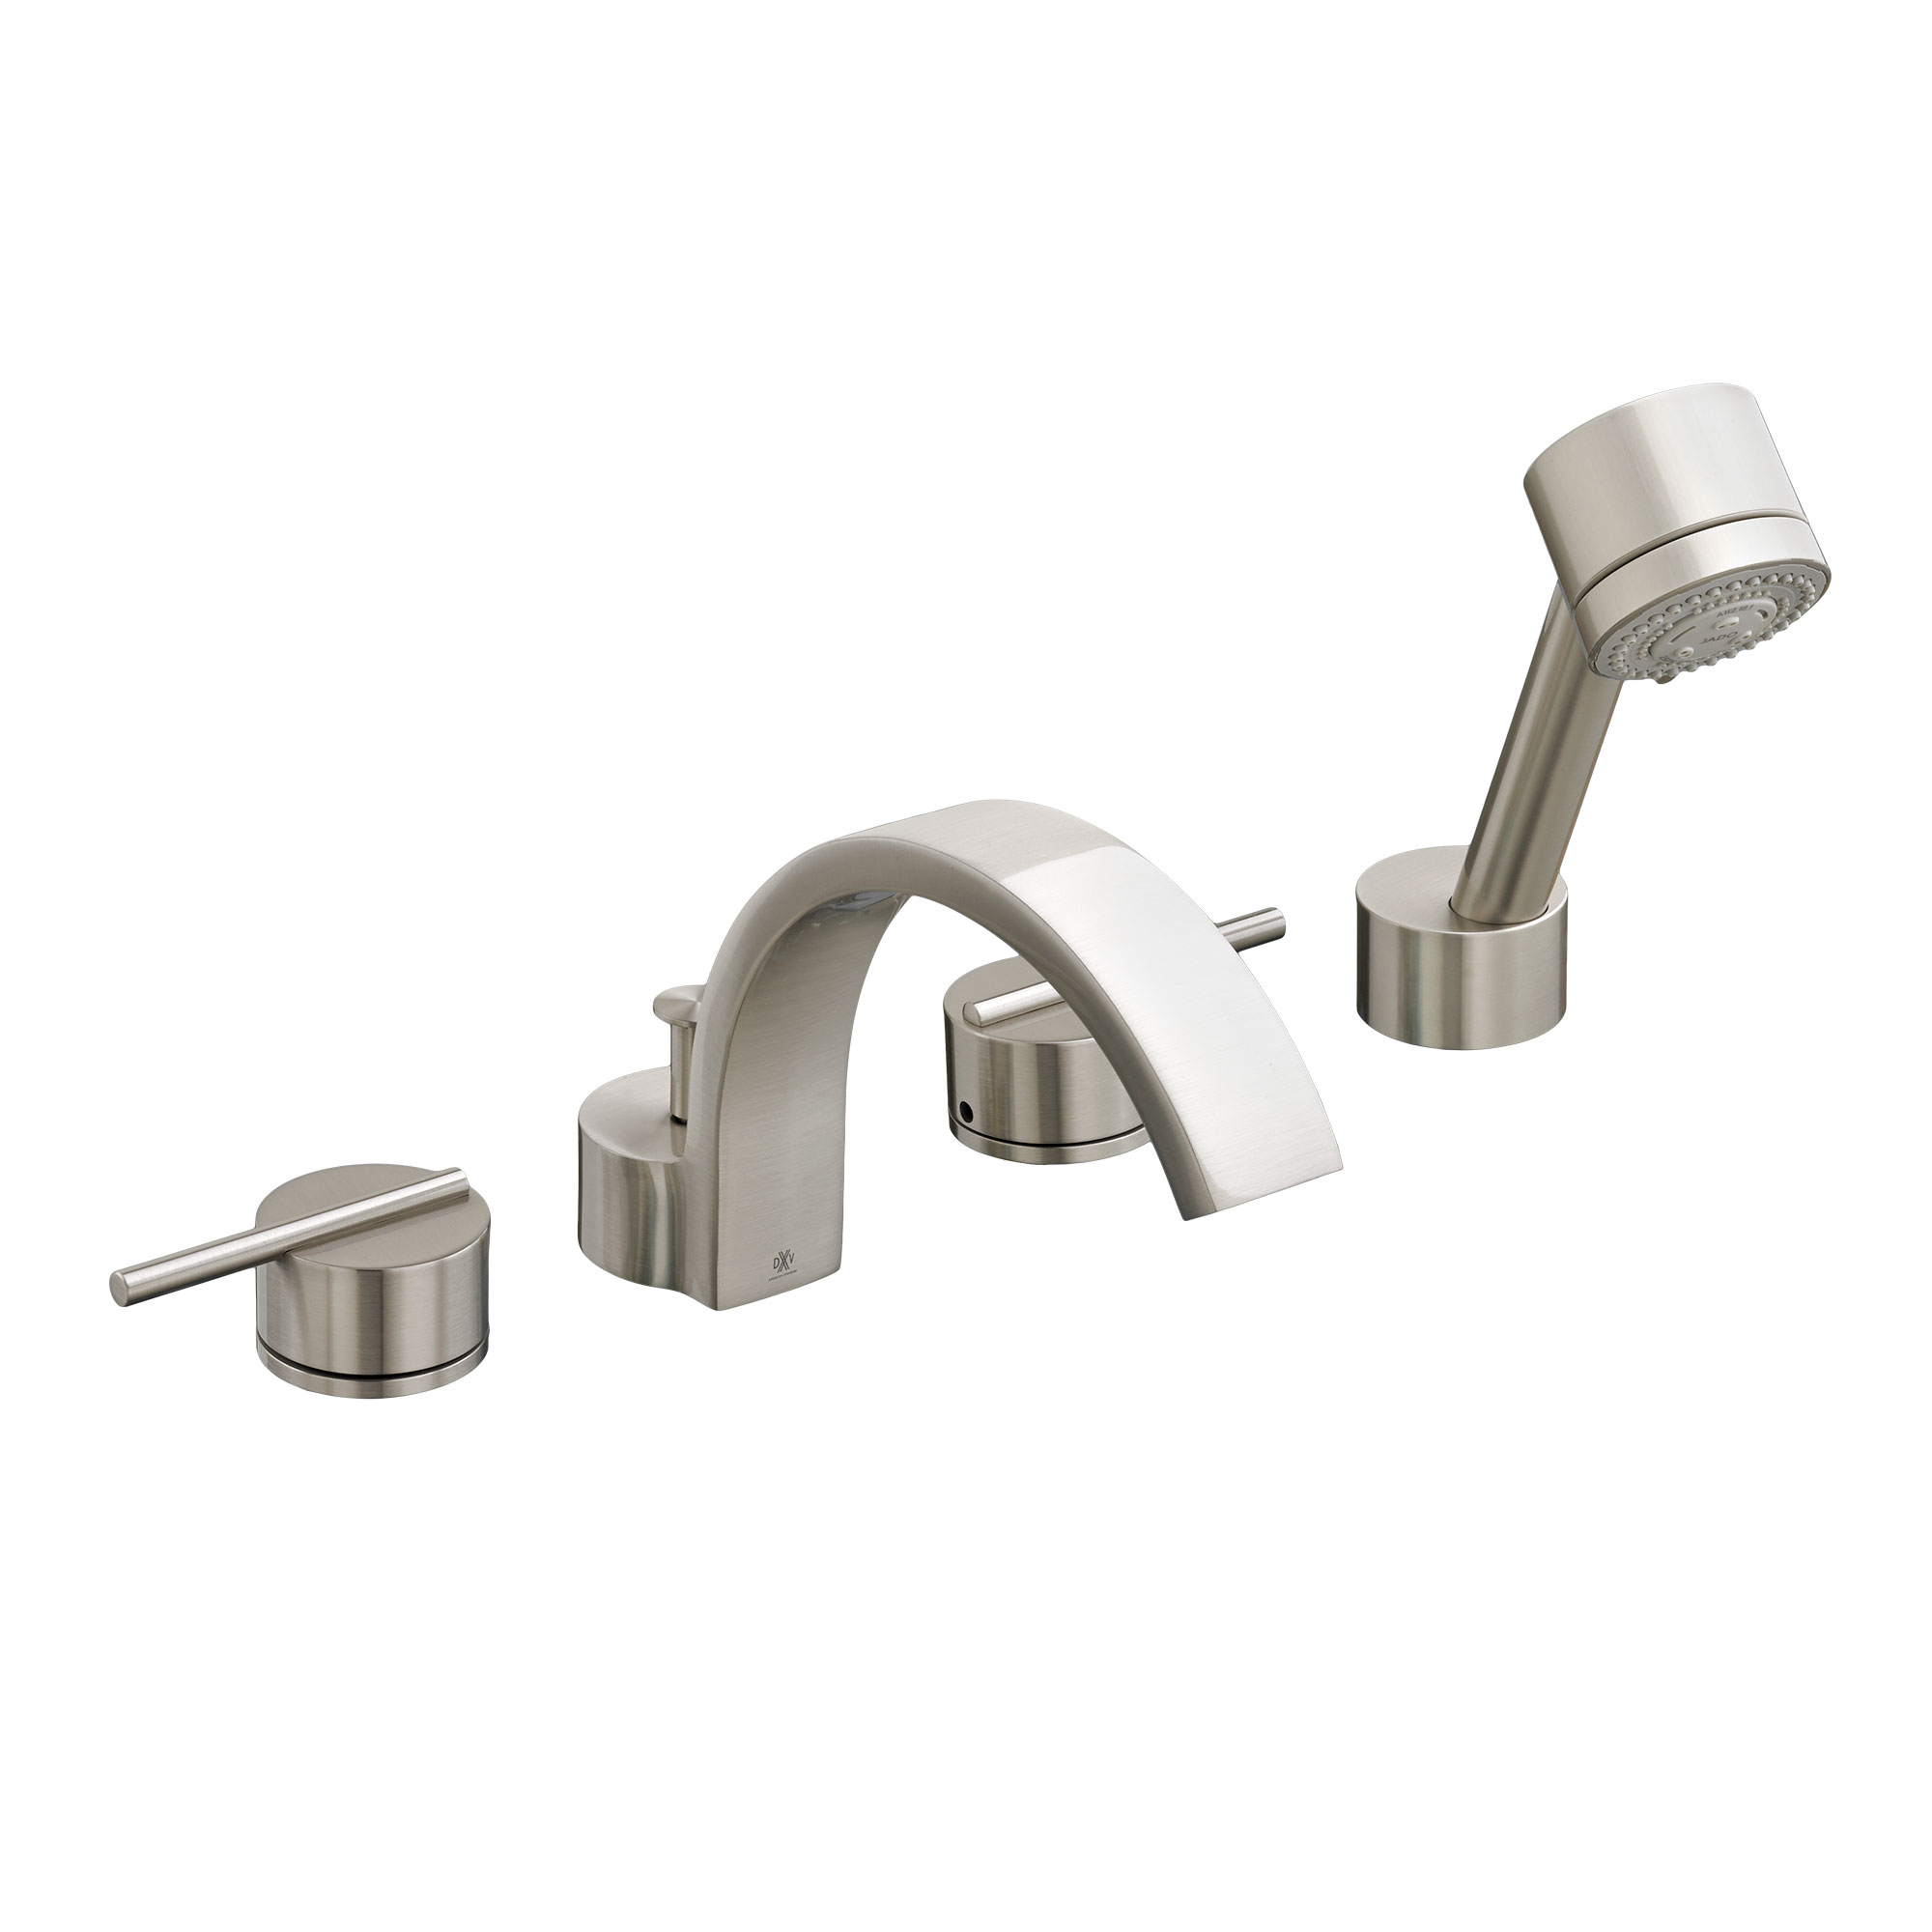 Deck Mount Bathtub Faucet With Hand Shower